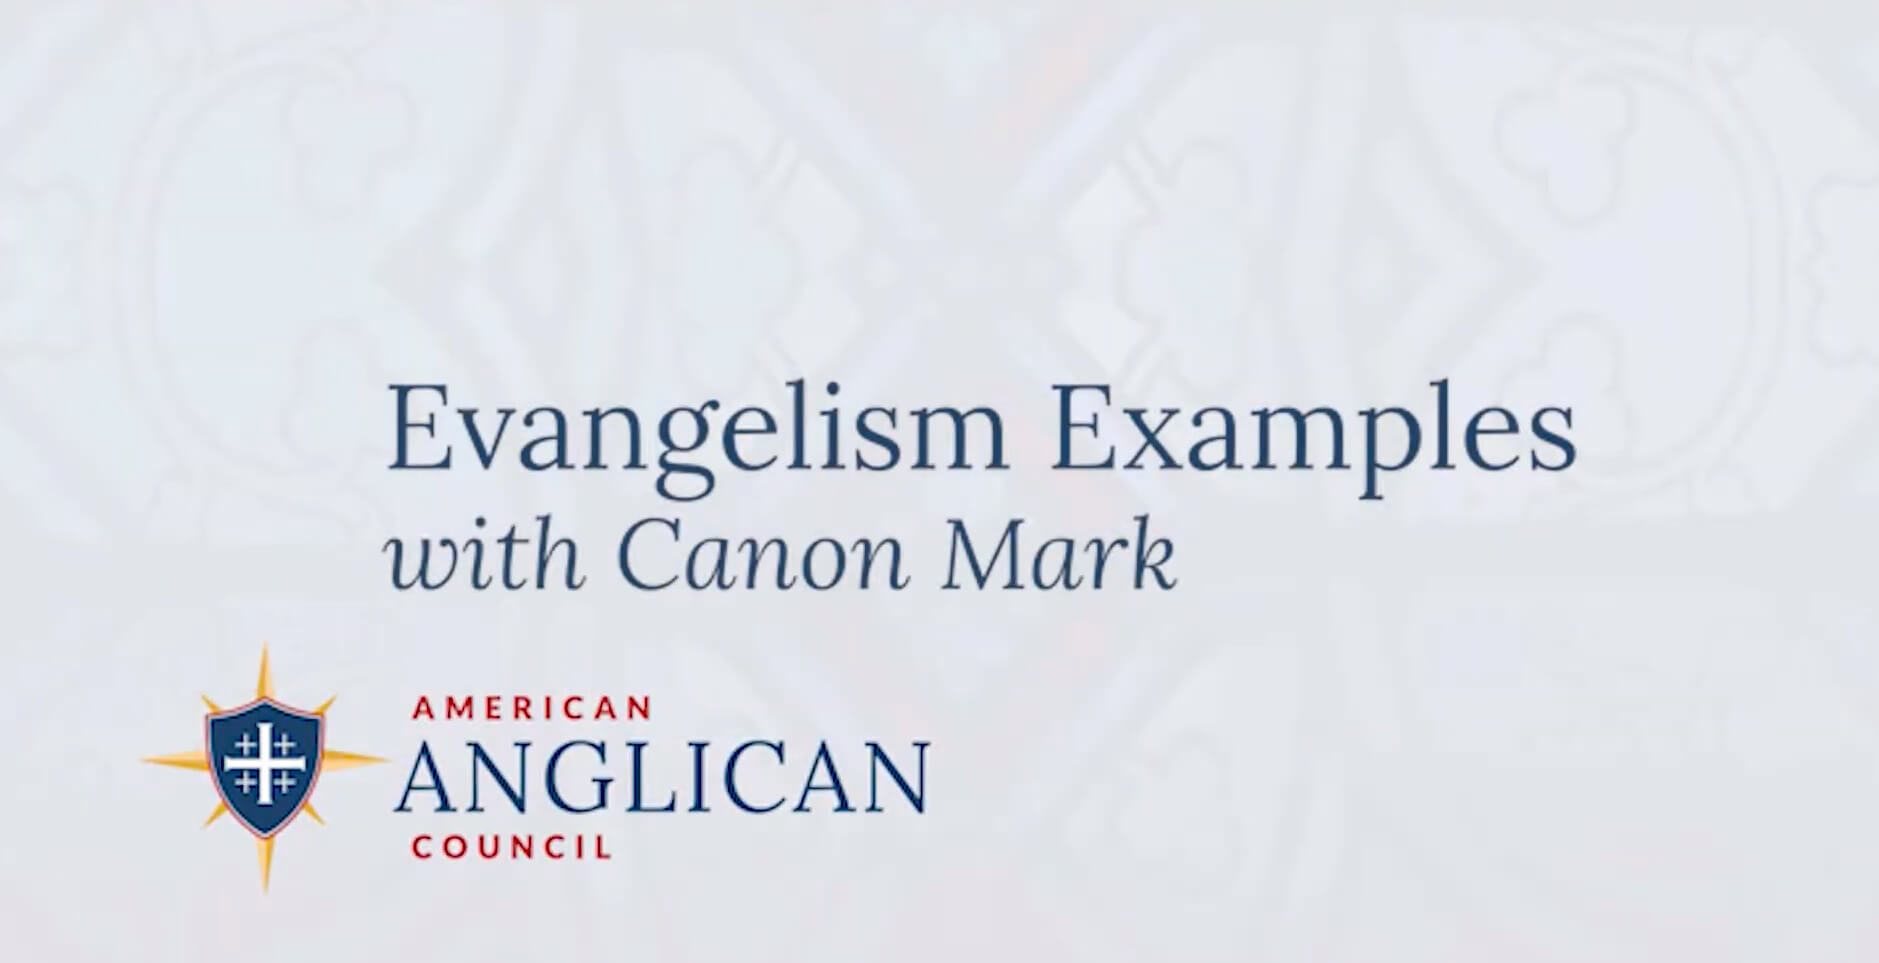 Evangelism Examples with Canon Mark